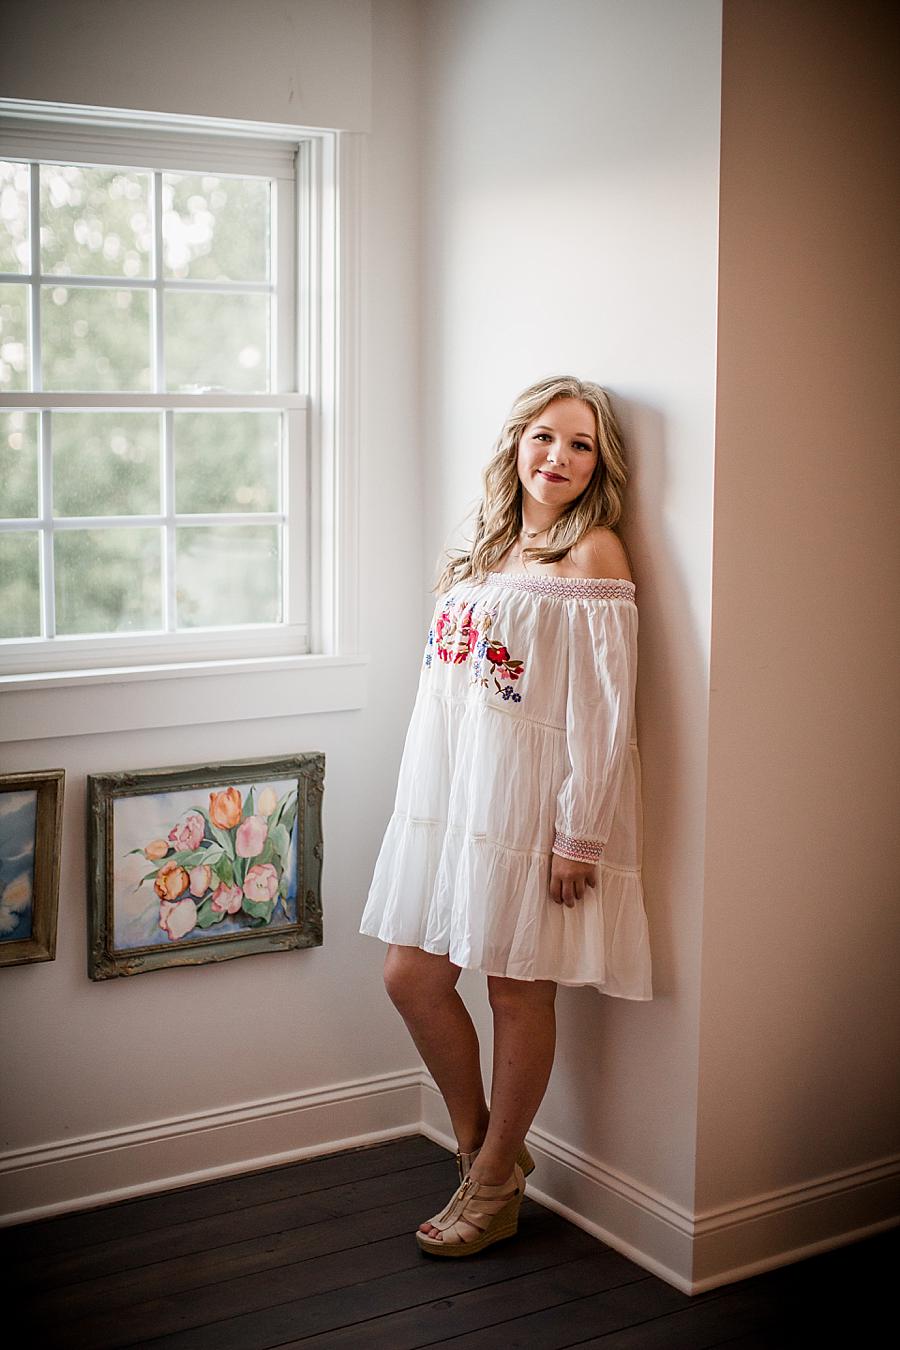 Off the shoulder dress at this Estate of Grace Senior Session by Knoxville Wedding Photographer, Amanda May Photos.